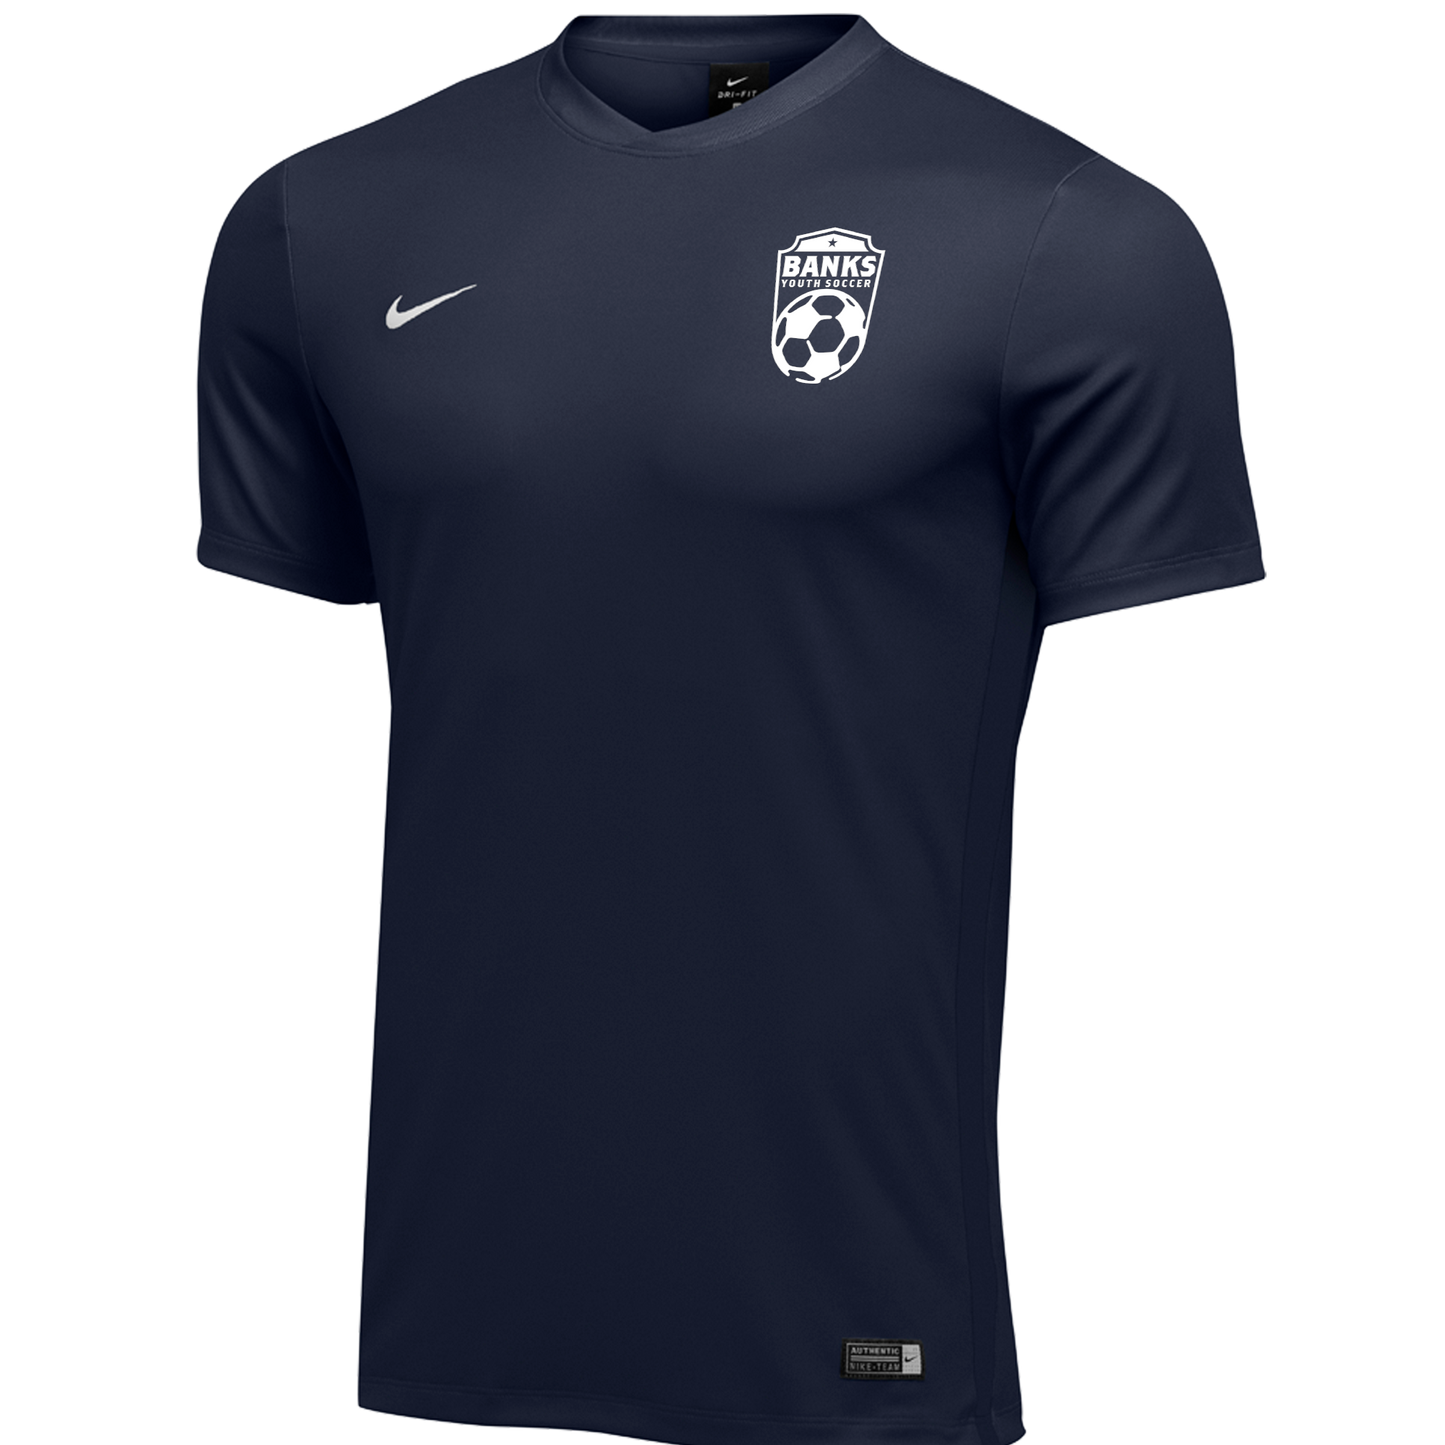 Banks Soccer Club Jersey [Adult]